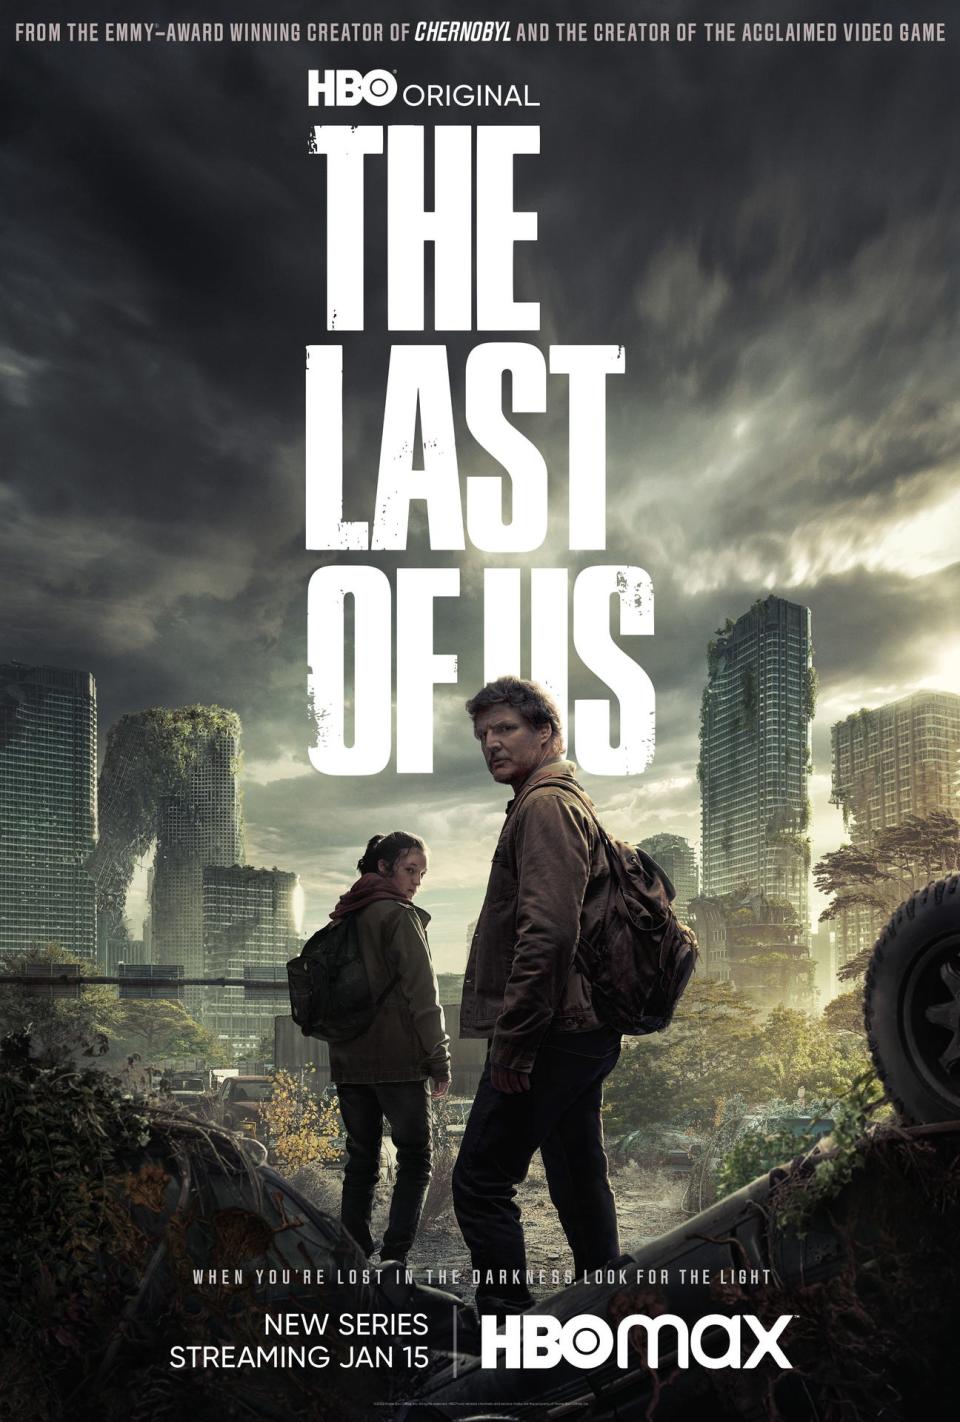 Poster for HBO's "The Last of Us."